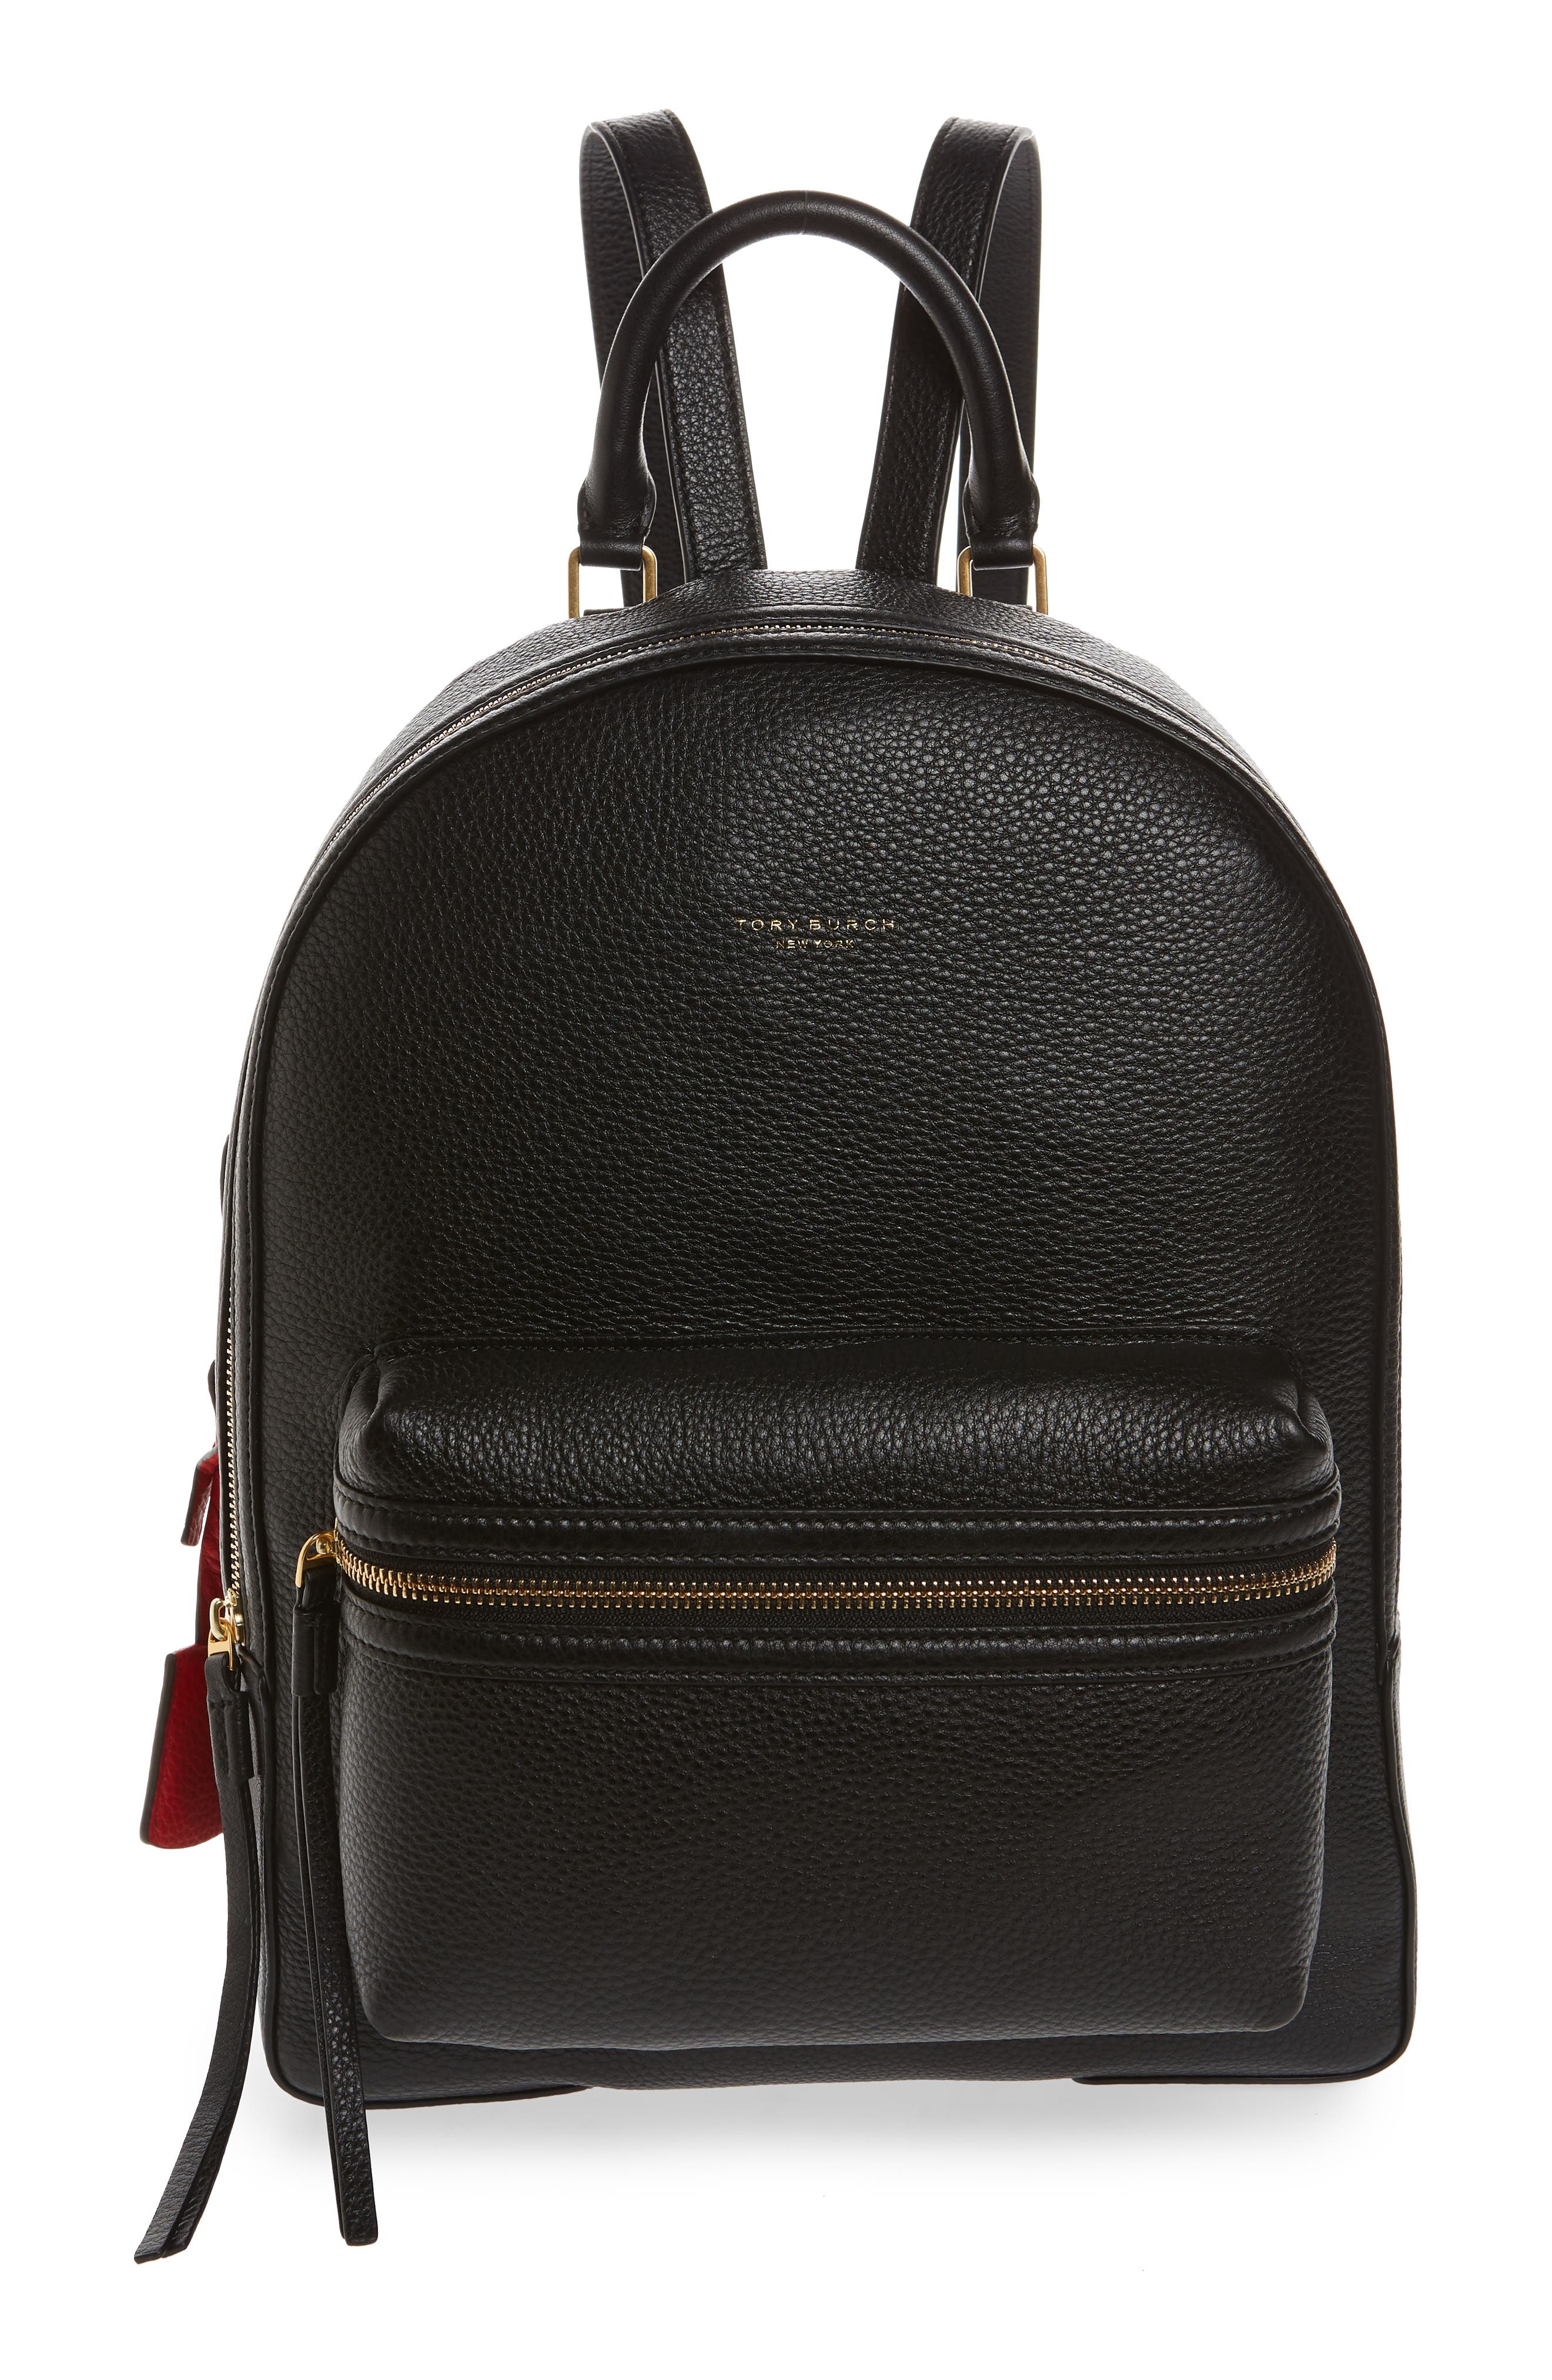 tory burch leather backpack